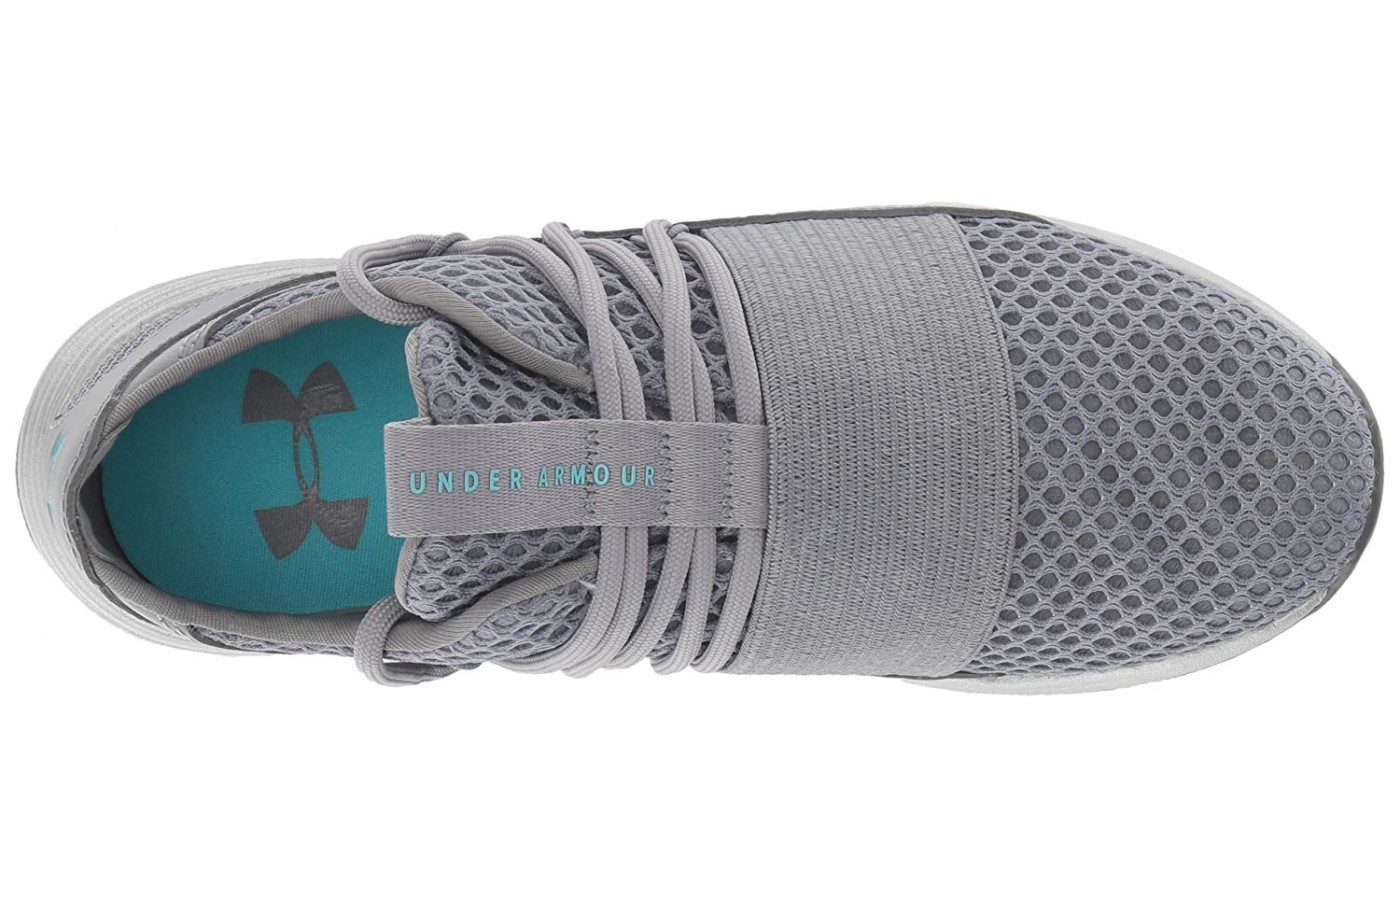 Under Armour Breathe Lace X NM Reviewed 